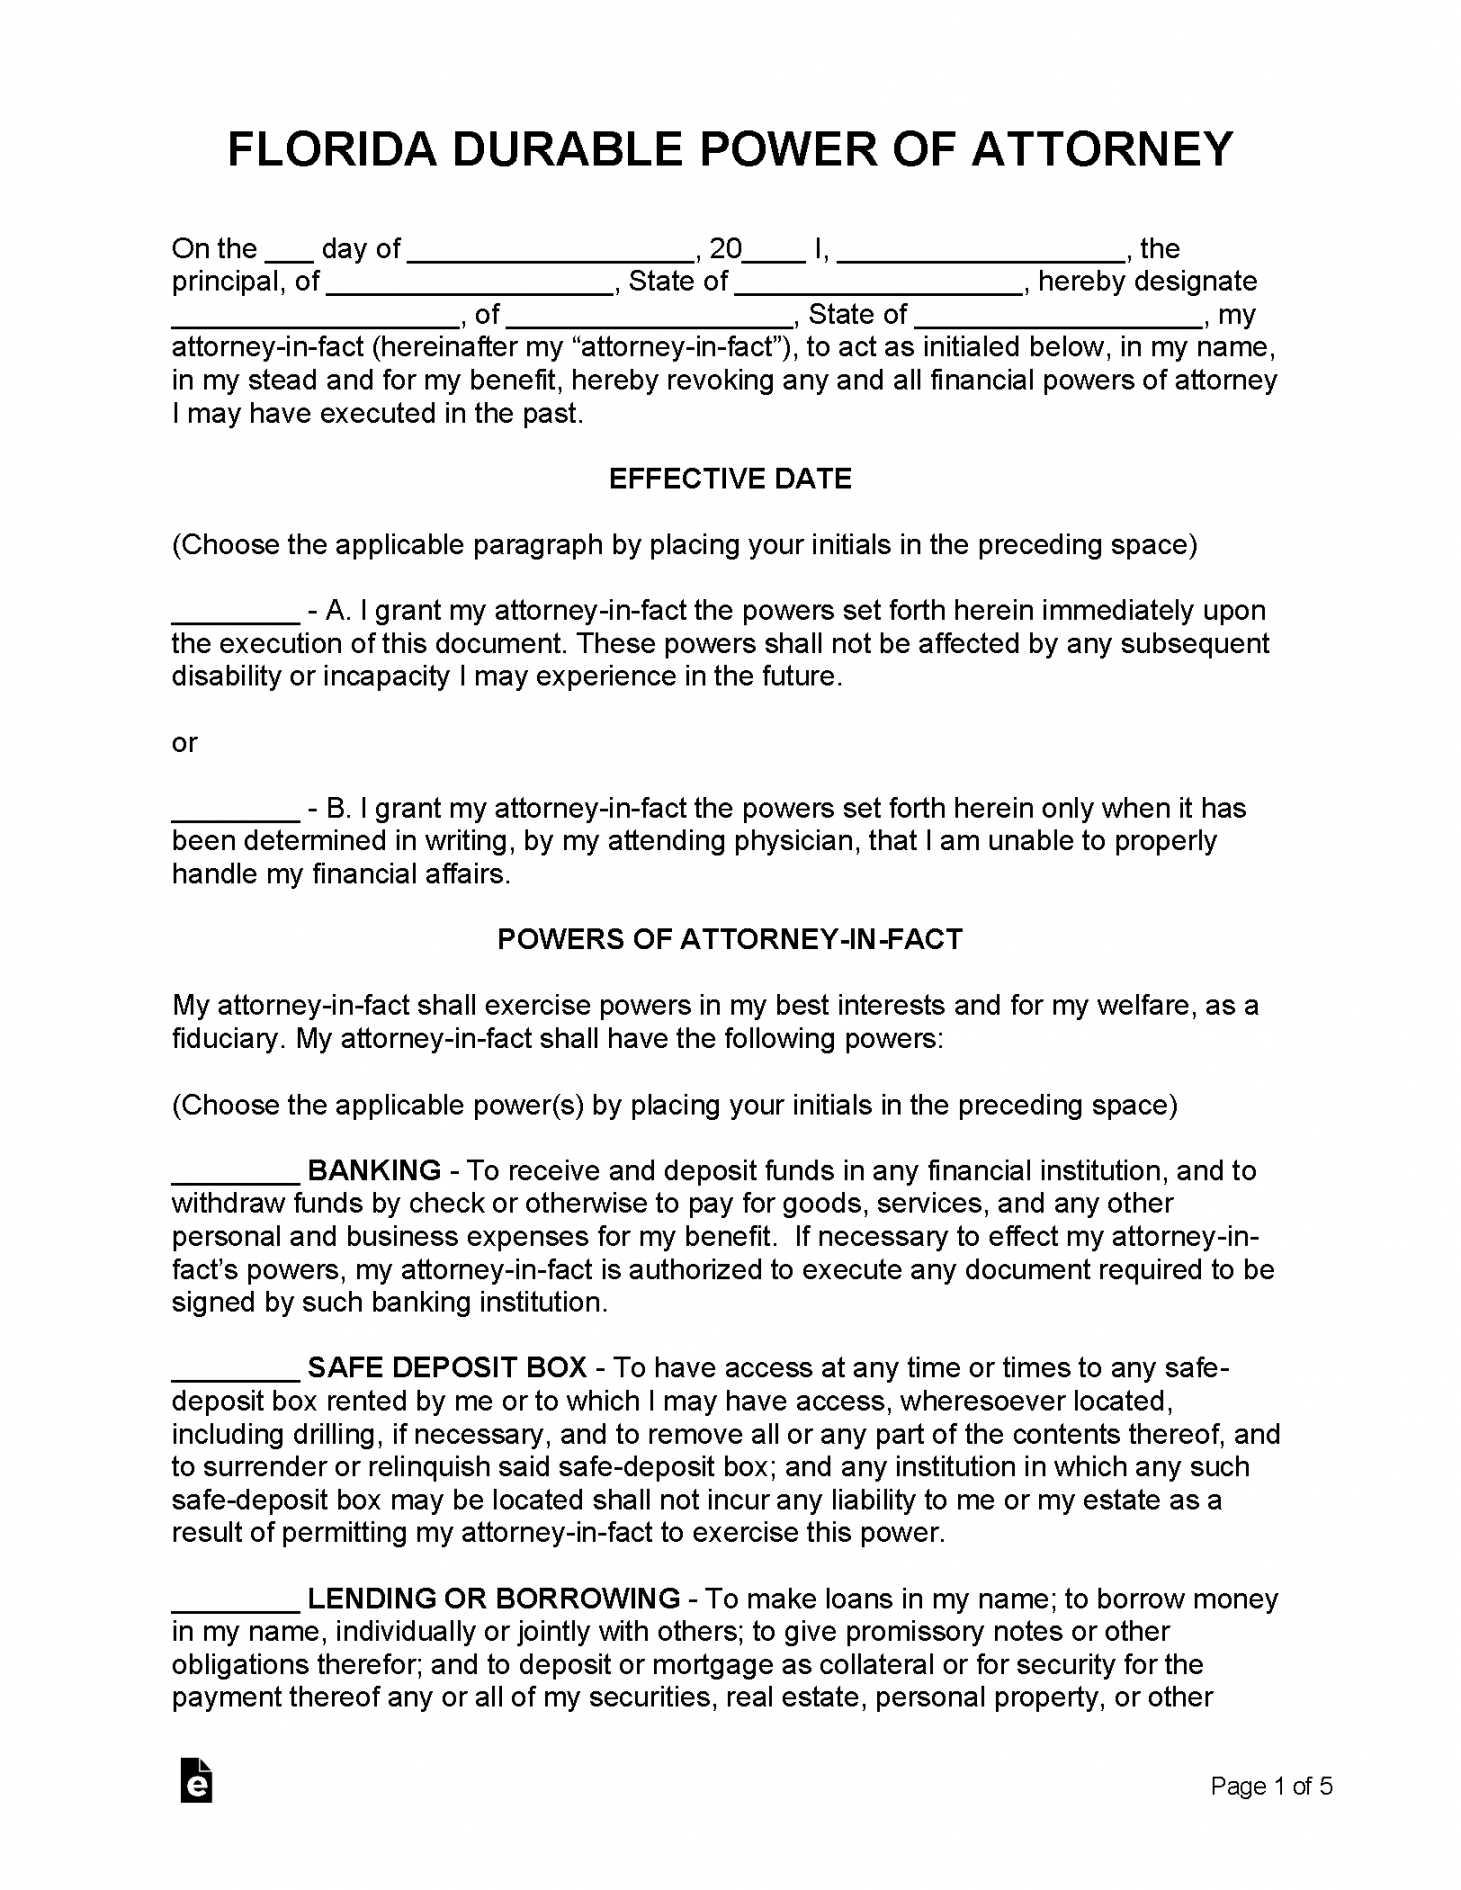 Free Durable (Financial) Power of Attorney Form  Florida - FREE Printables - Free Printable Durable Power Of Attorney